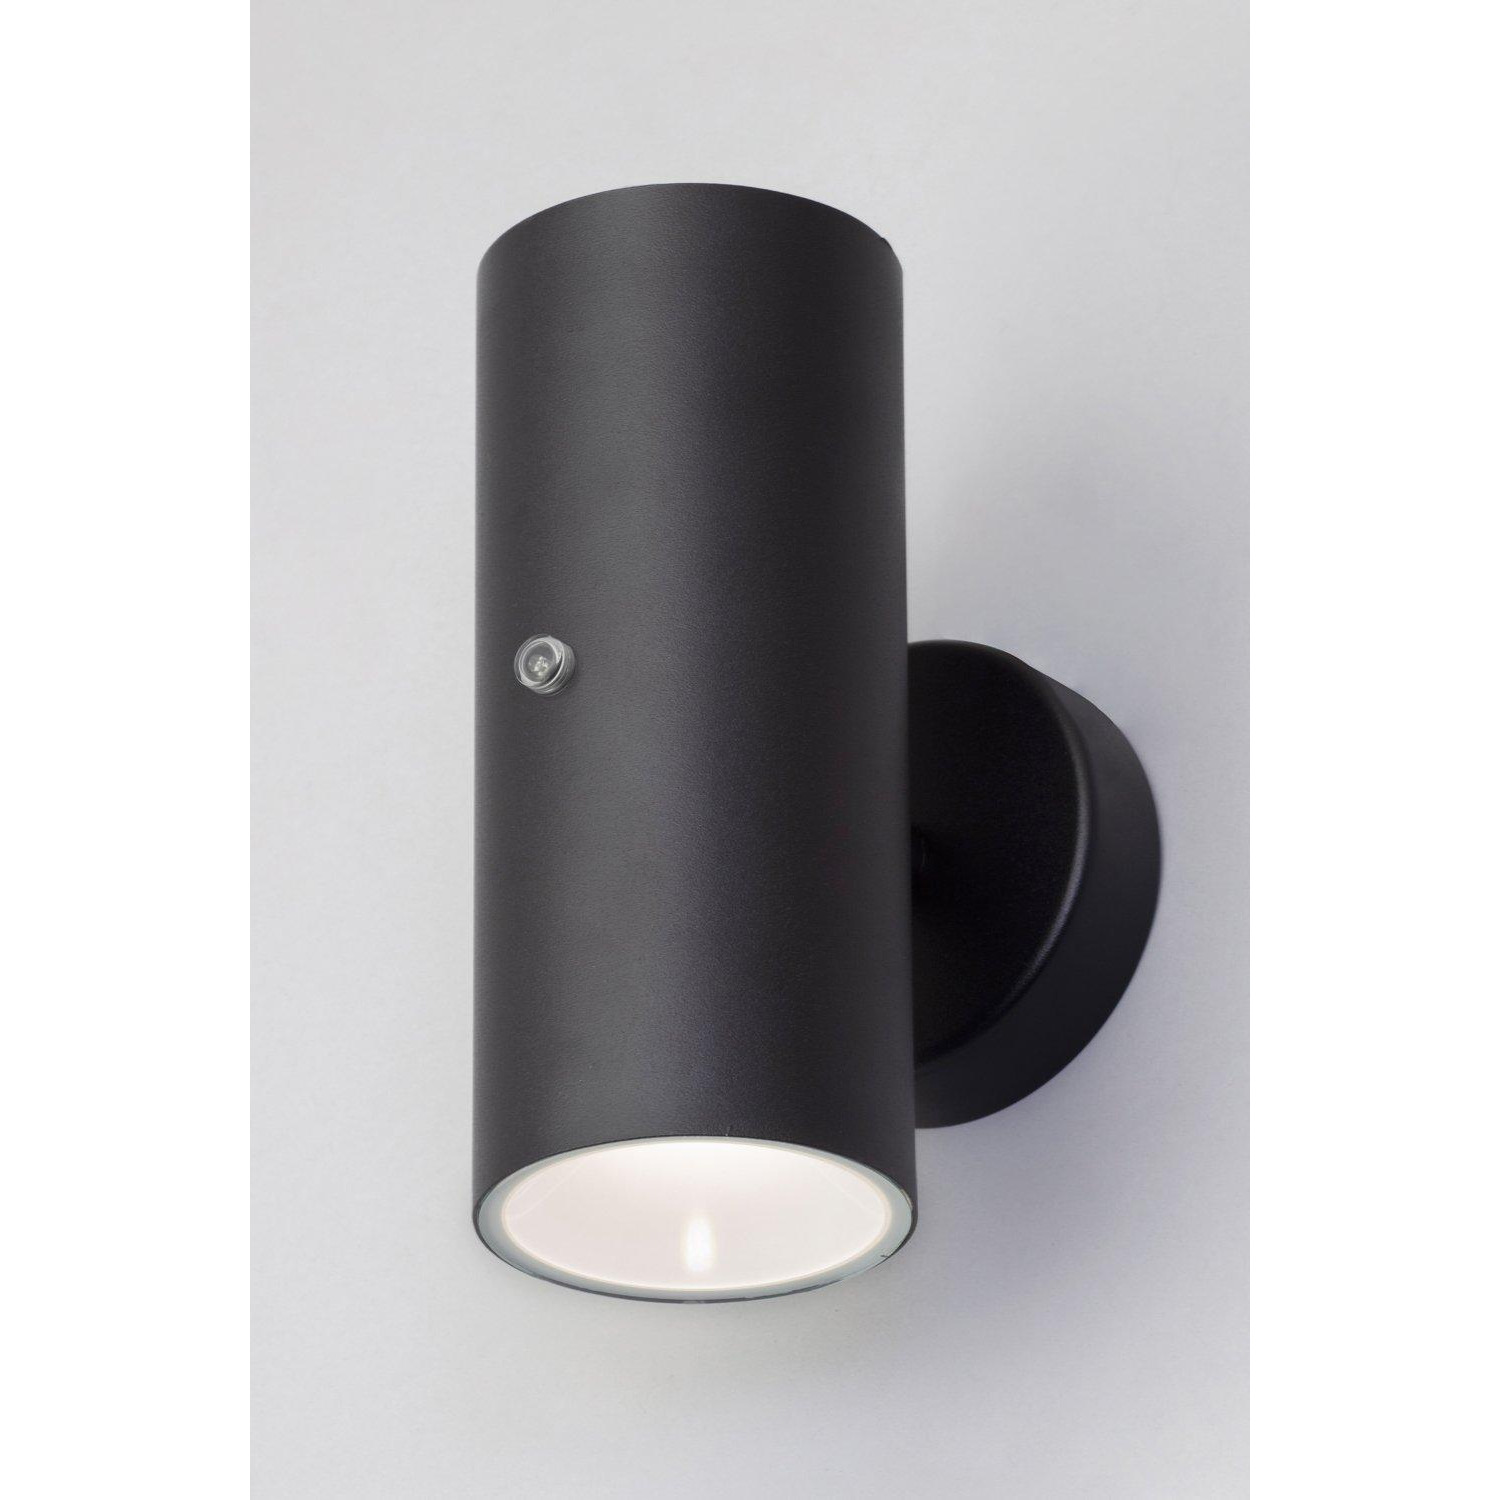 Grant Up and Down Outdoor Wall Light with Sensor - image 1